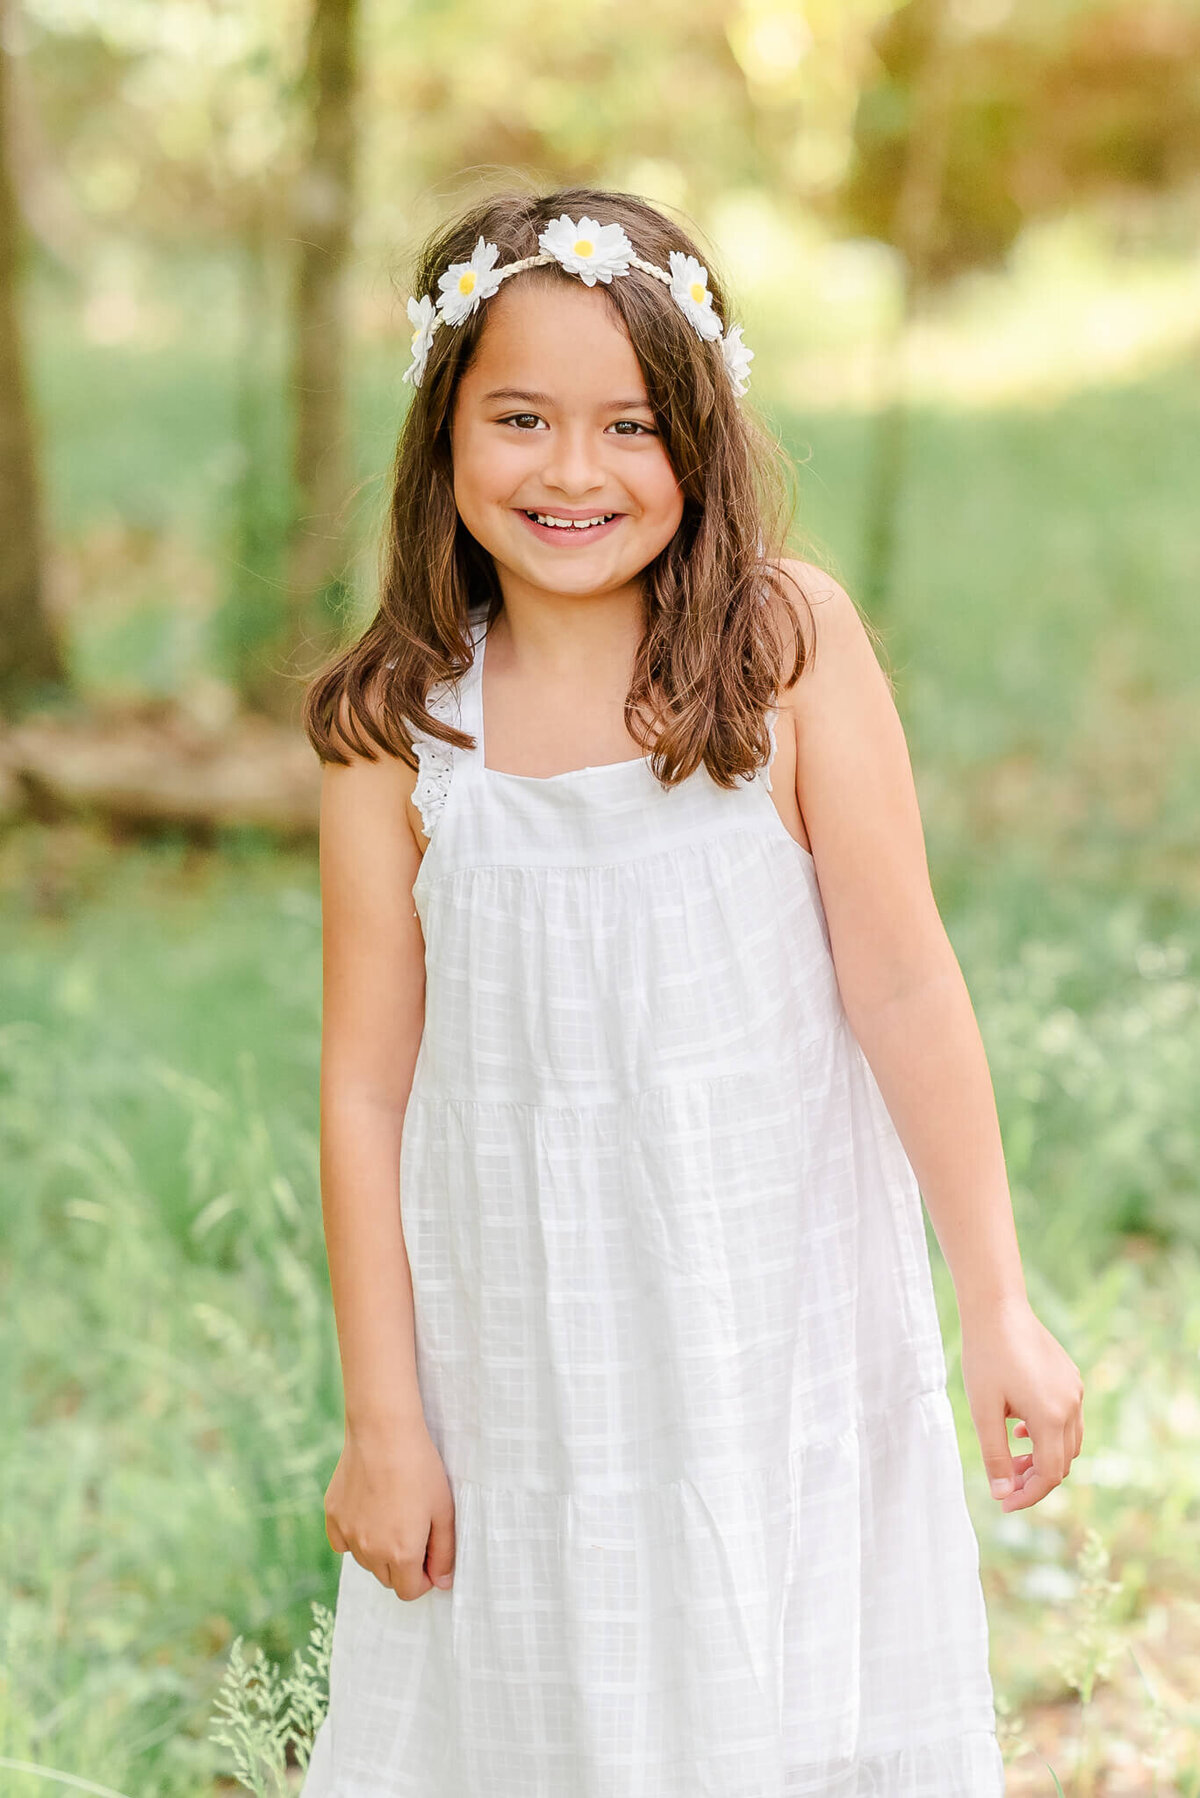 A young girl wearing a white dress and flower crown smiles for the camera at Northwest River Park in Chesapeake, VA.